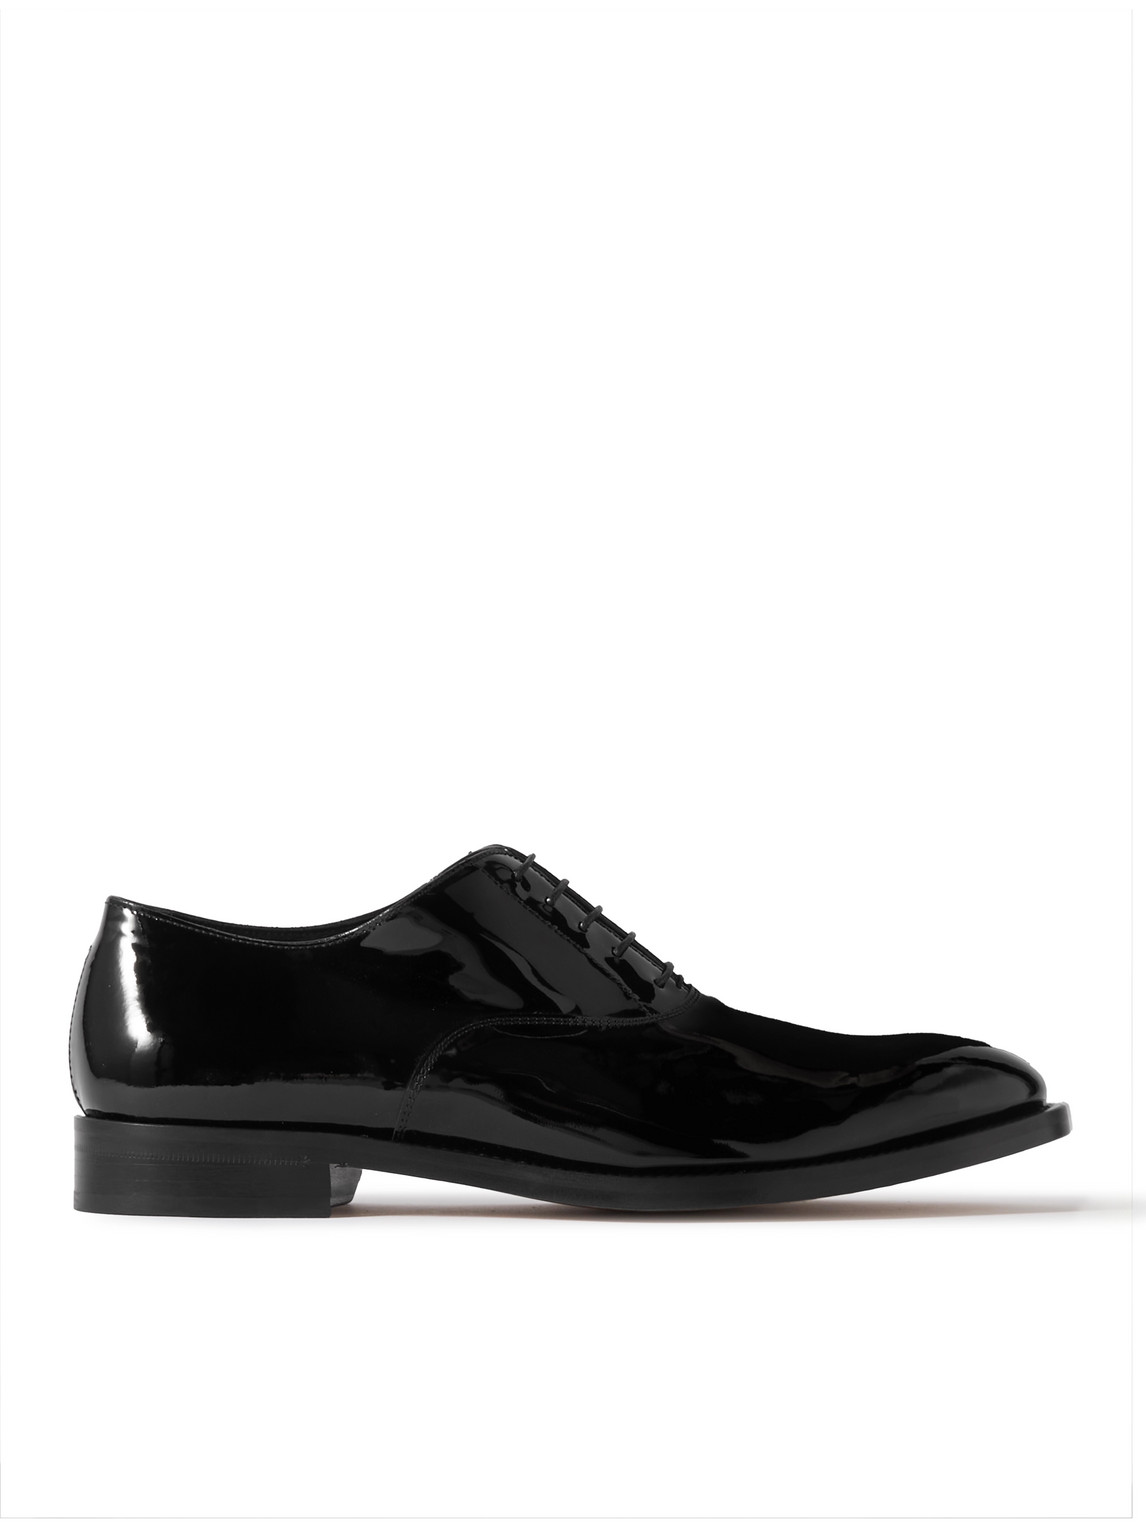 Gershwin Patent-Leather Oxford Shoes